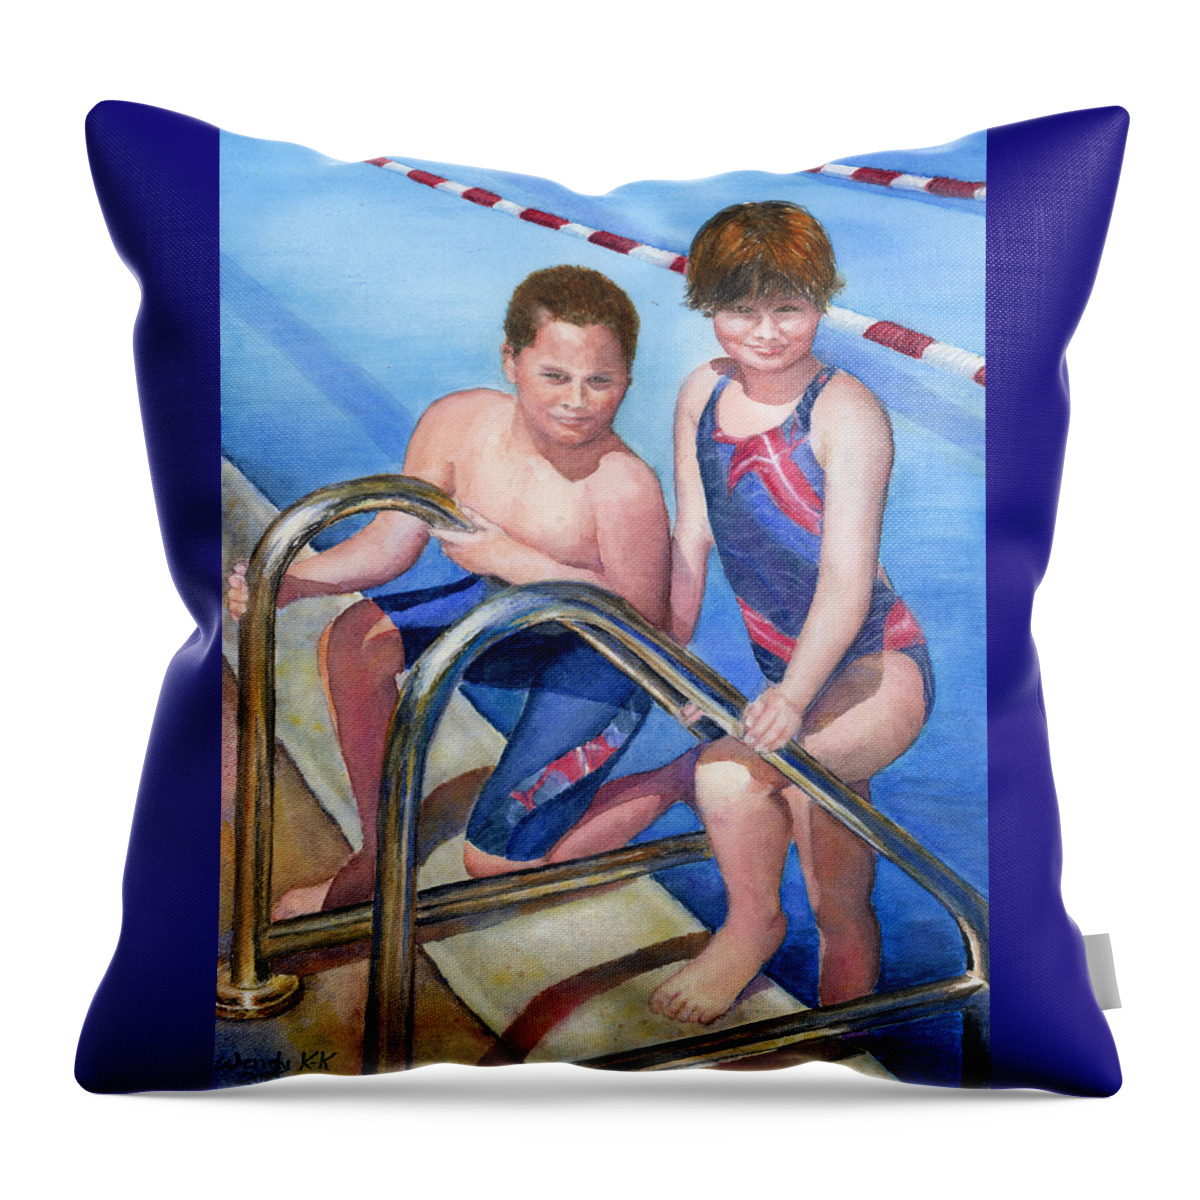 Swimming Pool Throw Pillow featuring the painting The Proud Swimmers by Wendy Keeney-Kennicutt